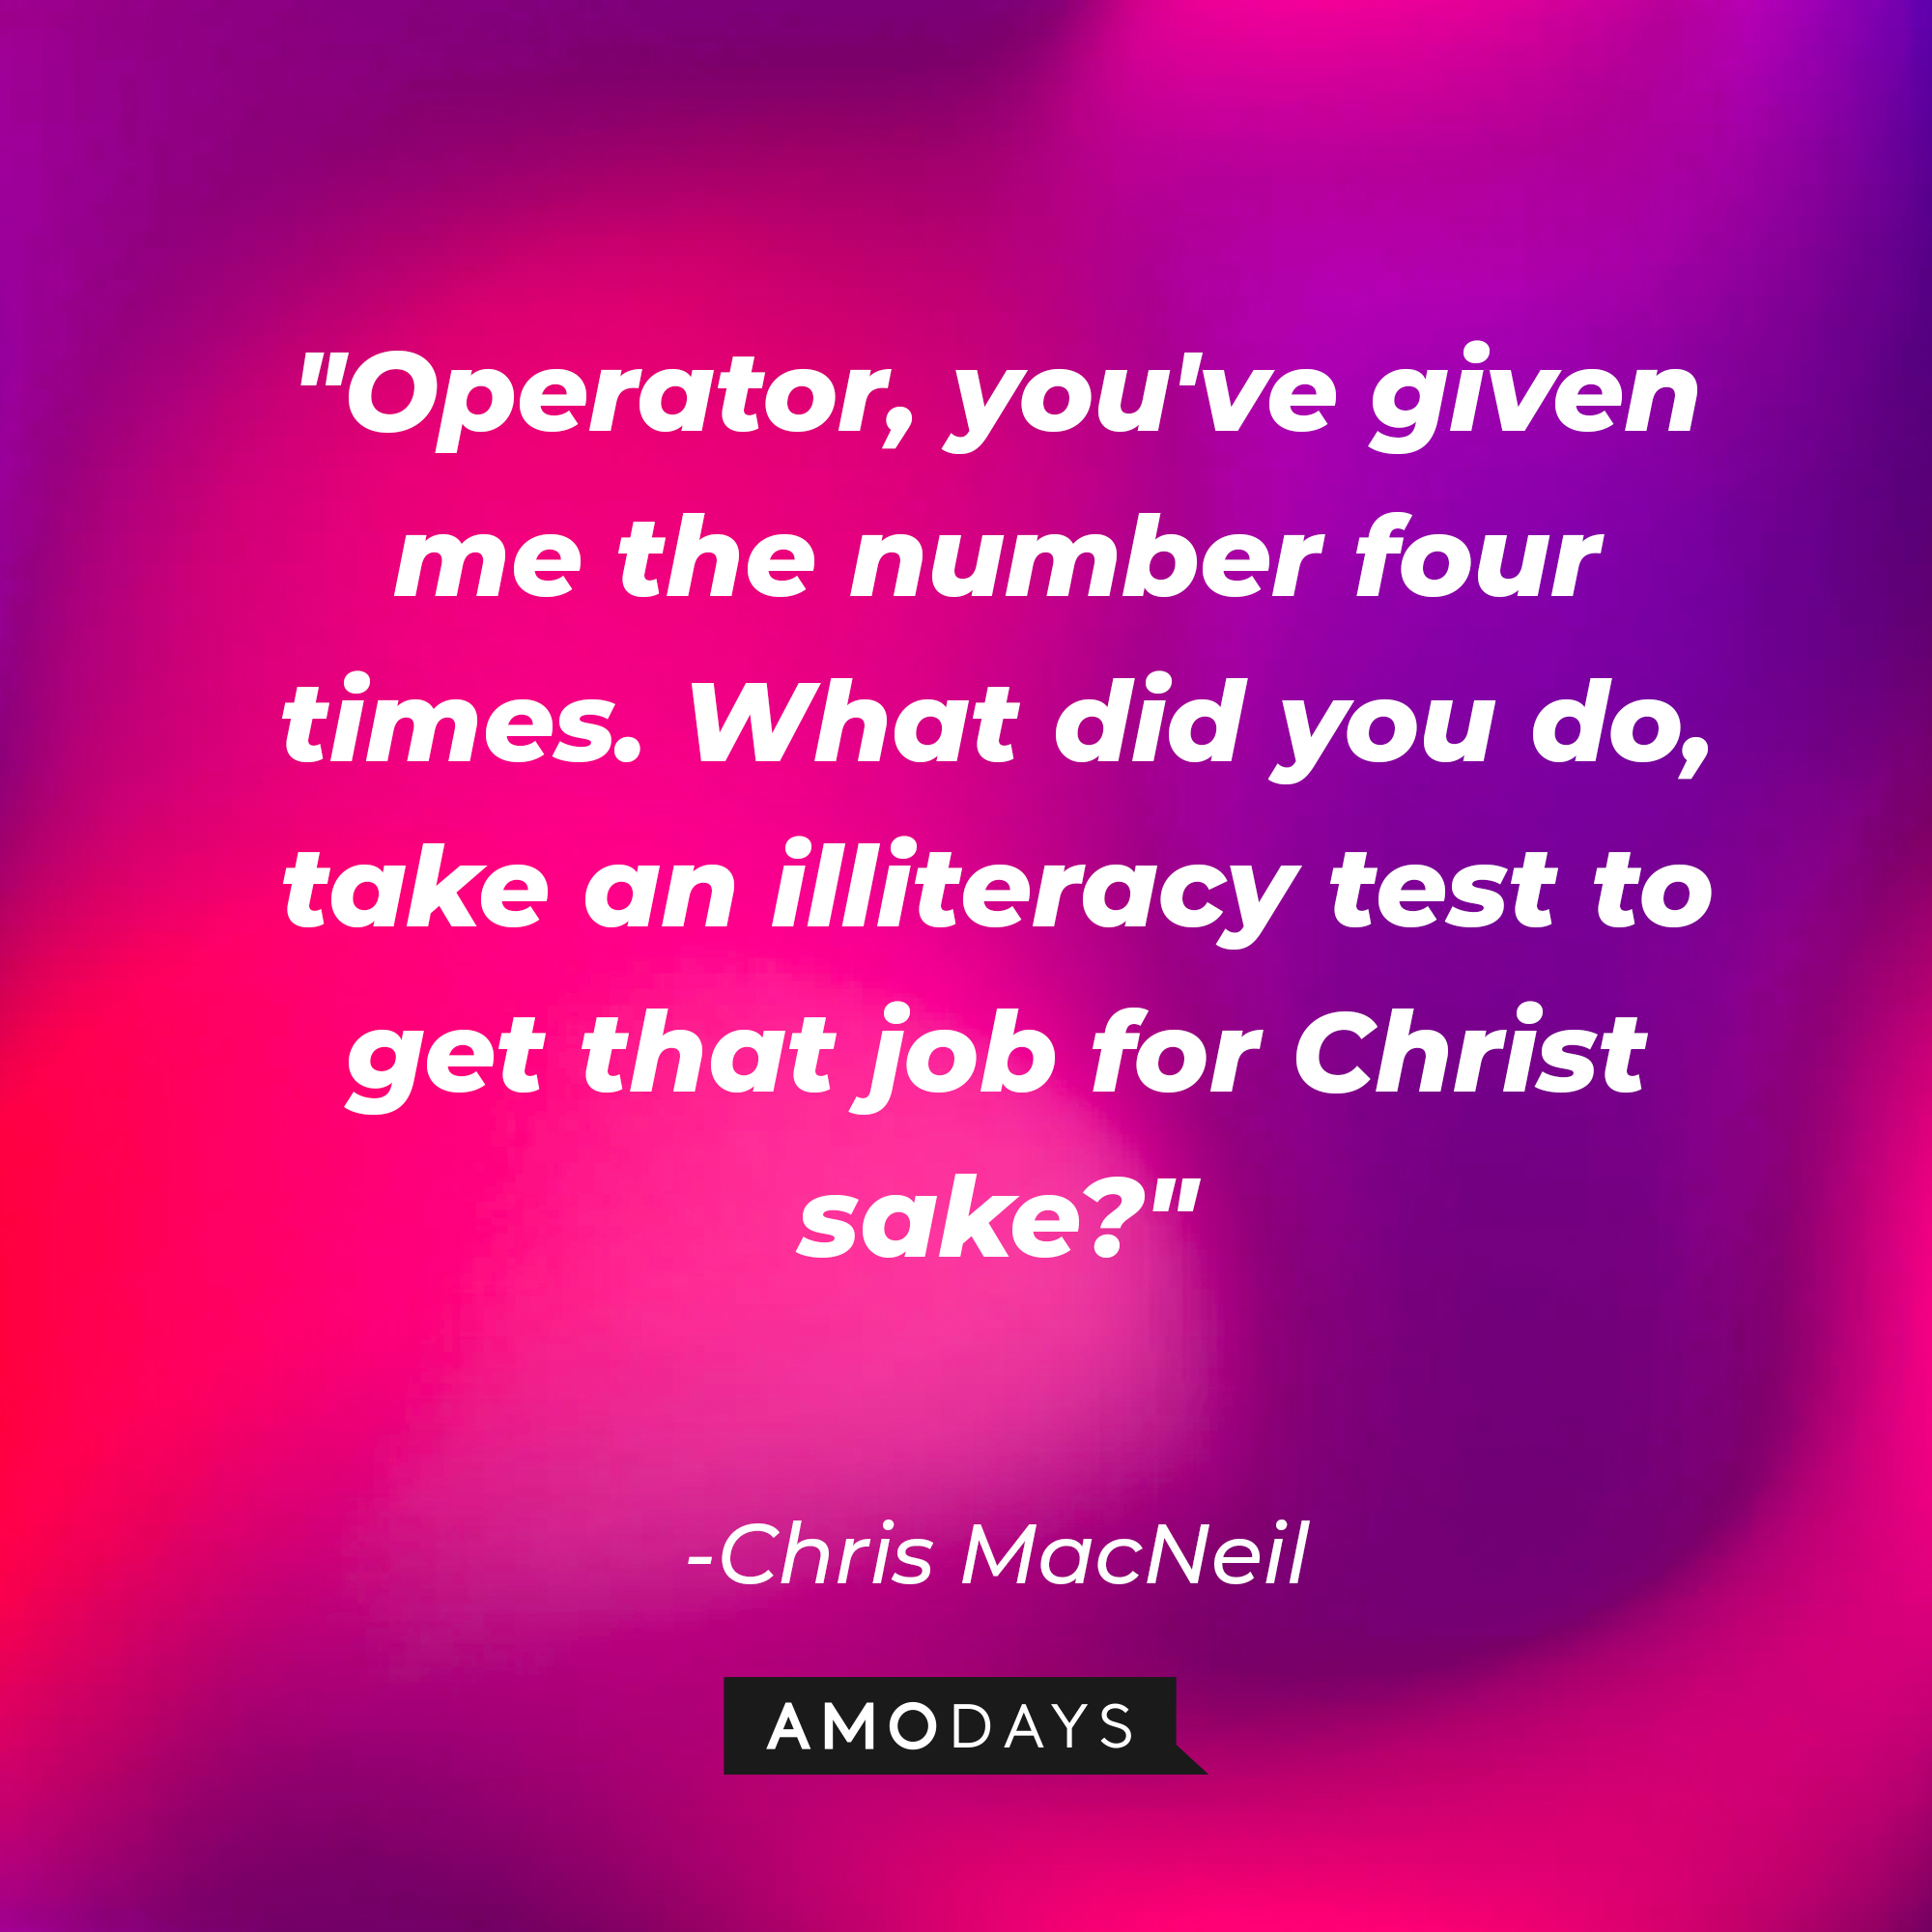 Chris MacNeil's quote: "Operator, you've given me the number four times. What did you do, take an illiteracy test to get that job for Christ sake?" | Source: AmoDAys